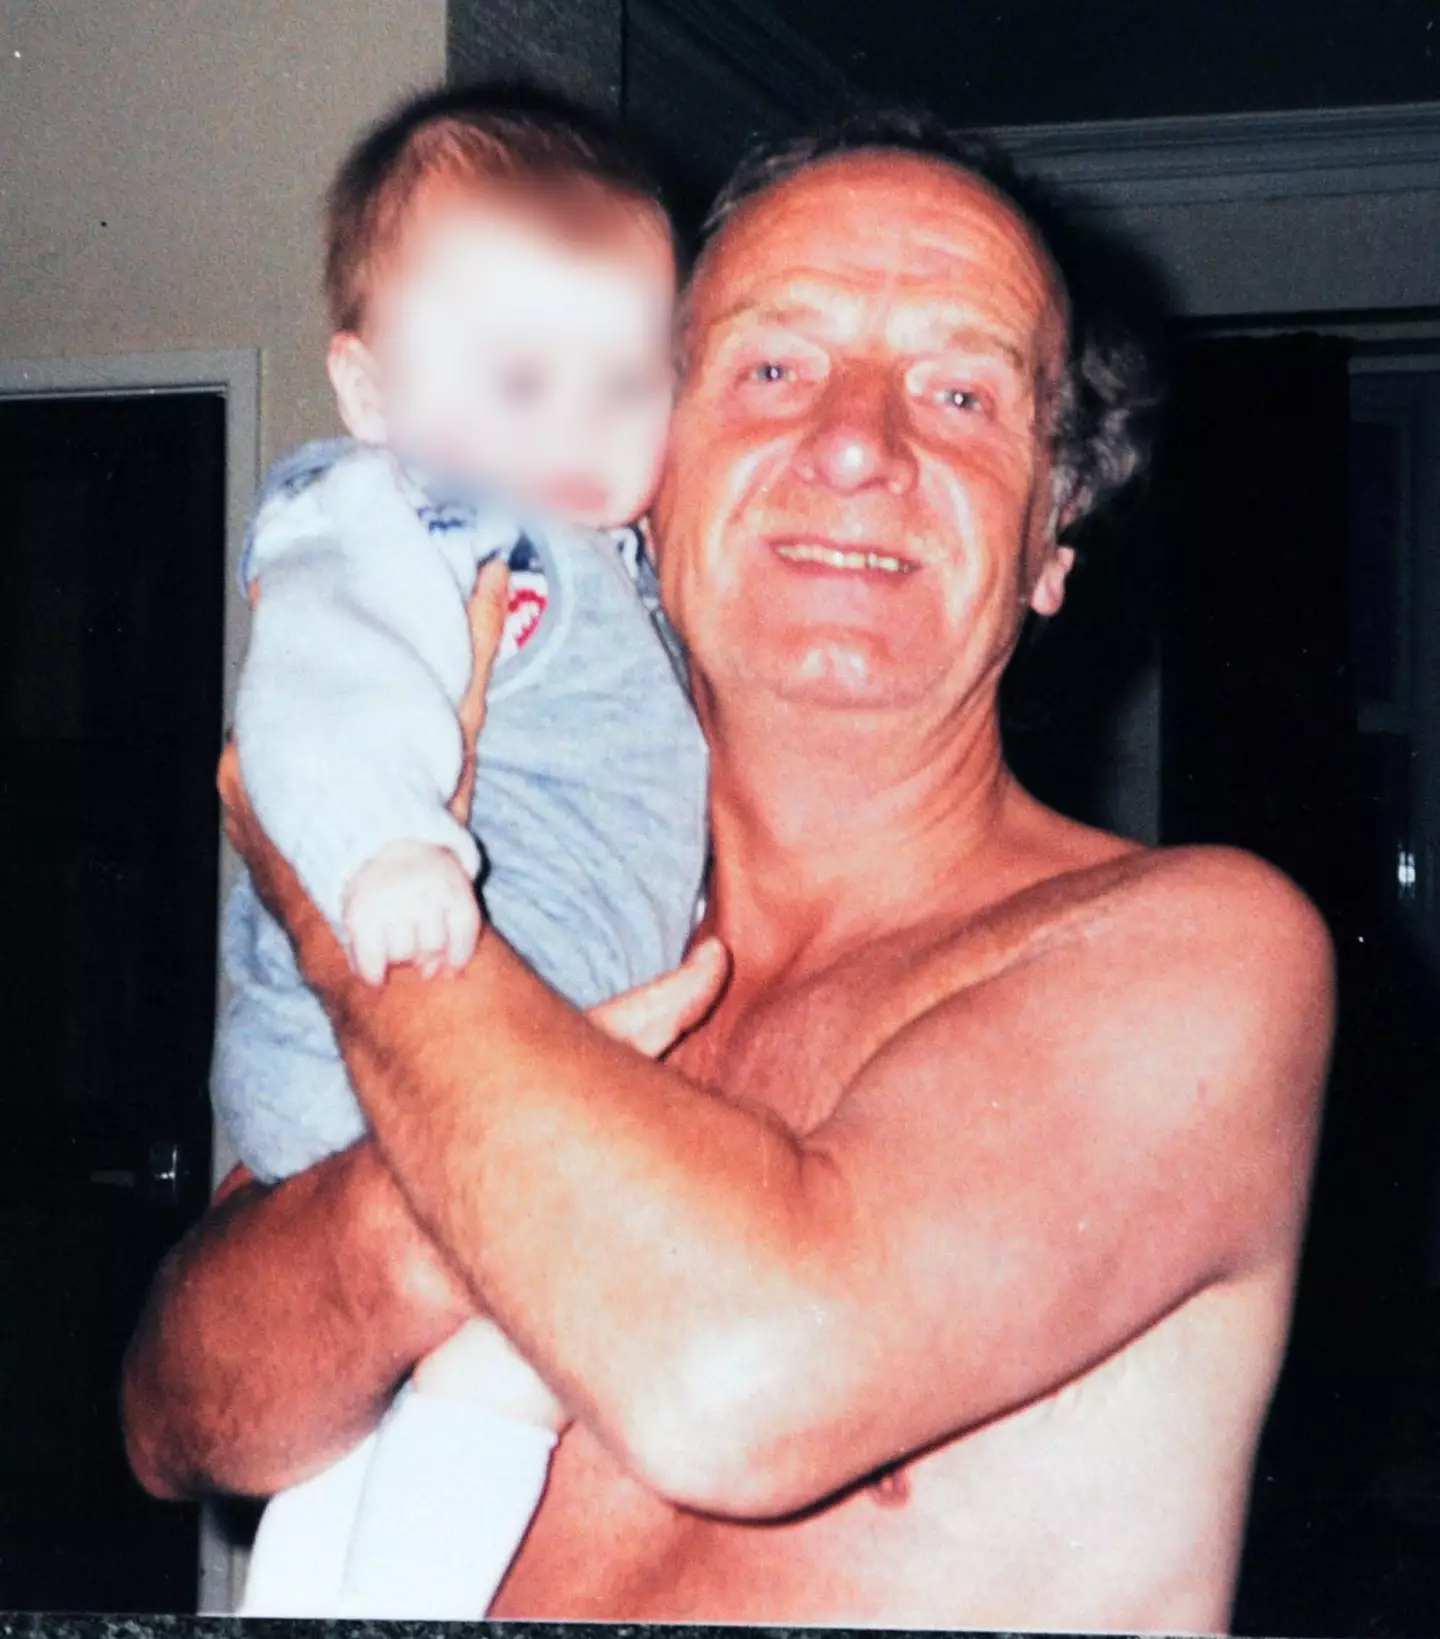 Raymond Calvert had a baby aged 78 with his 25-year-old girlfriend.